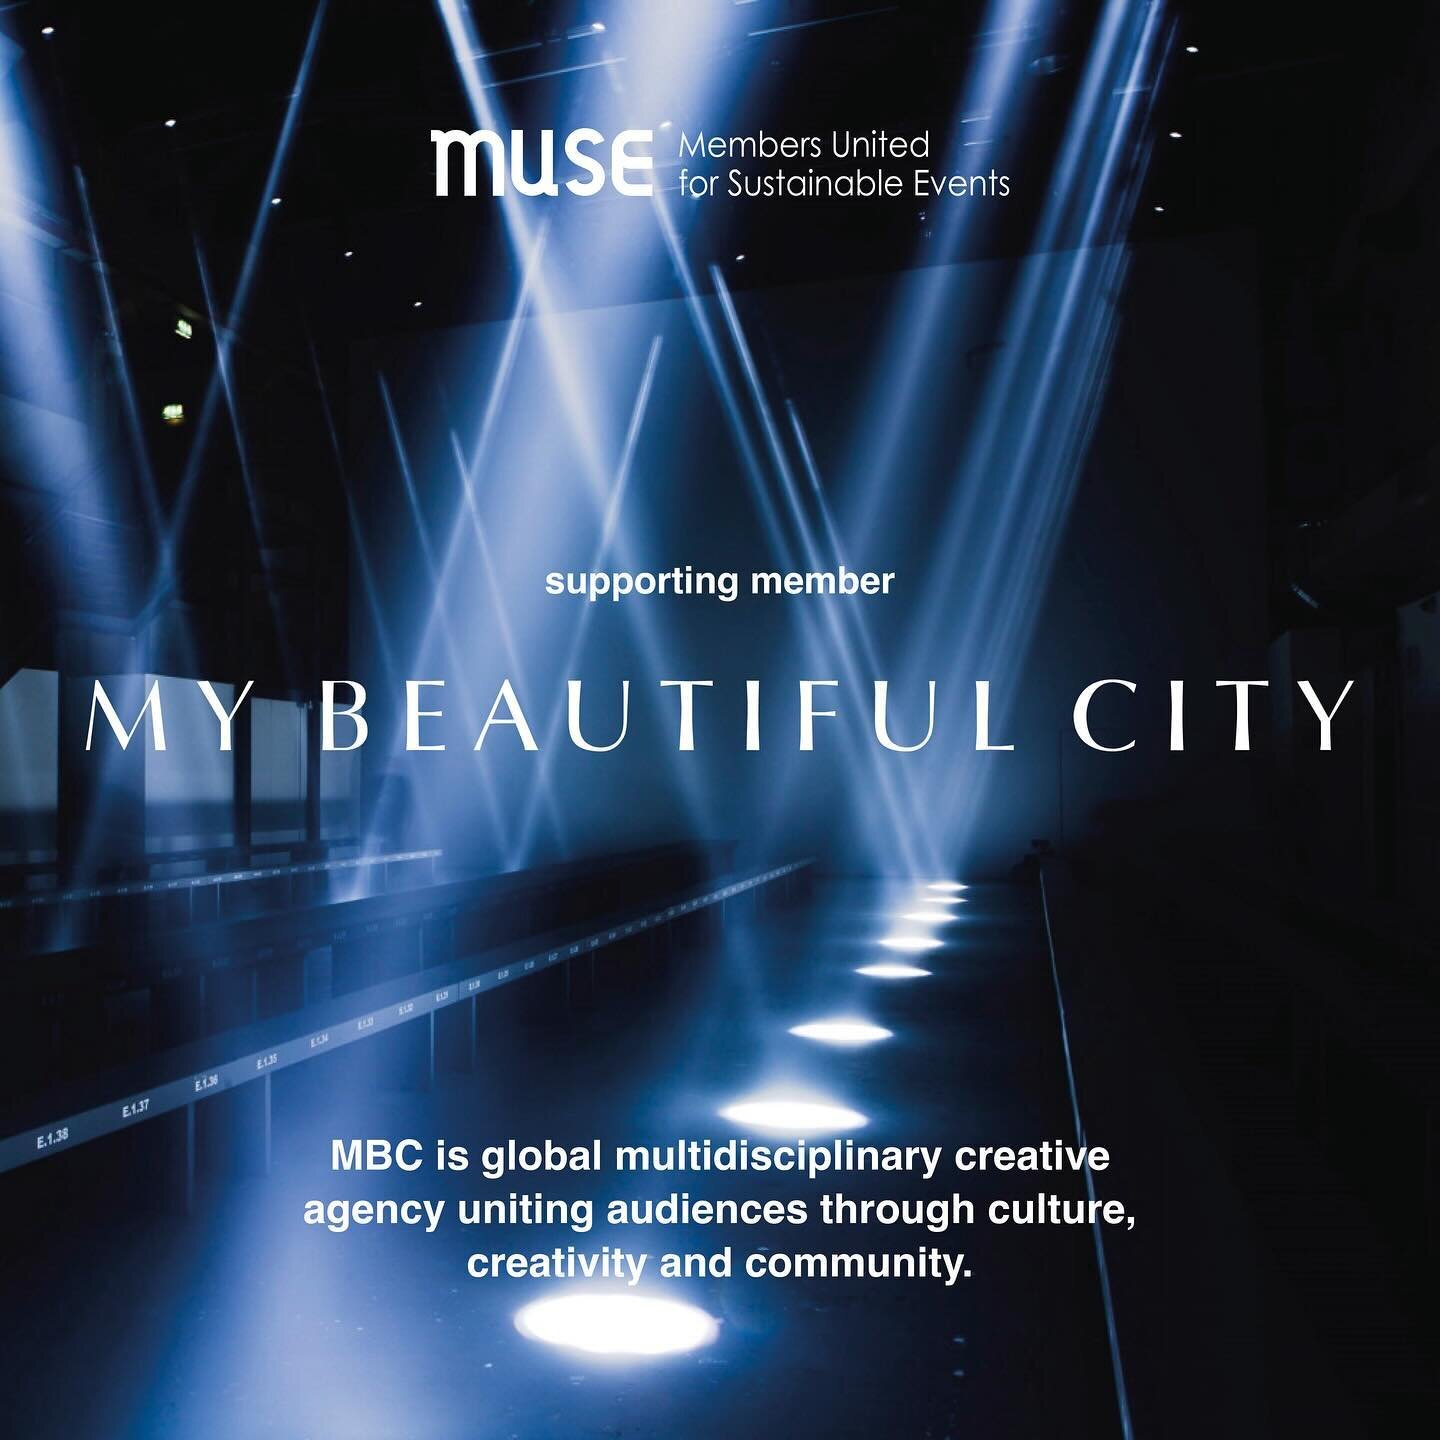 MUSE is honored to have @mybeautifulcity as a Supporting Member.

Founded in 2005, My Beautiful City is a global multidisciplinary creative agency that provides 360&deg; support spanning strategy, concept, design and production. Through exploratory, 